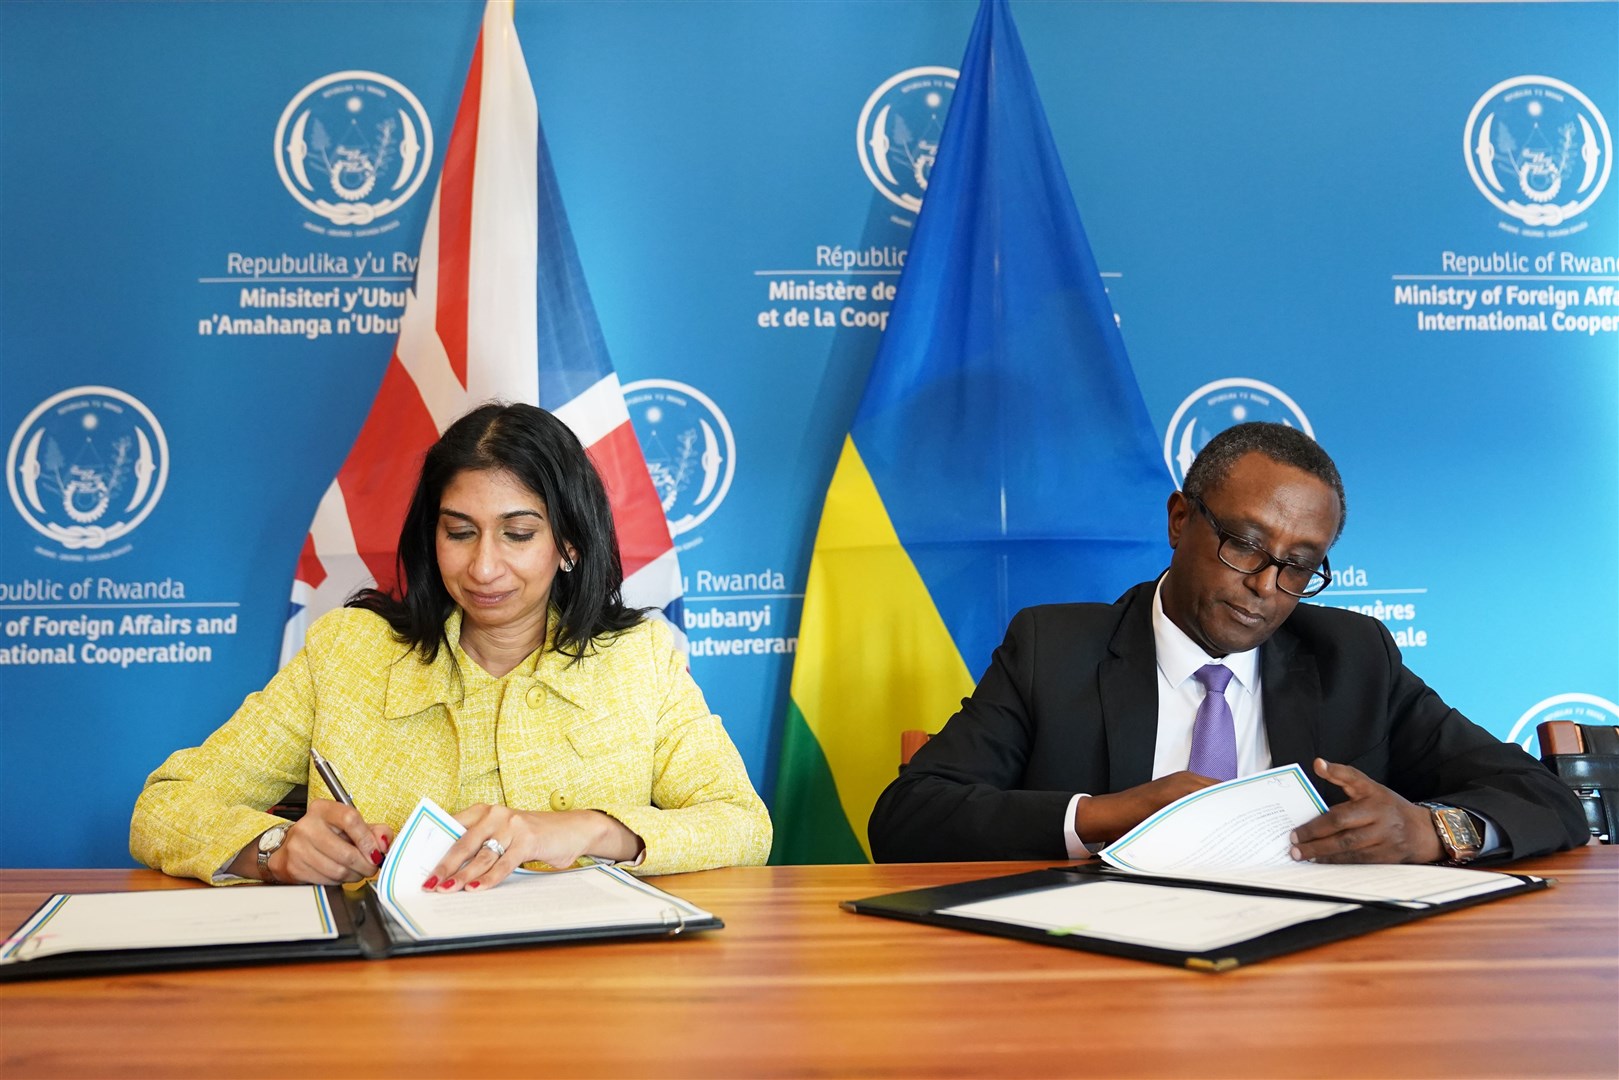 Suella Braverman and the Rwandan minister for foreign affairs and international co-operation, Vincent Biruta, sign an enhanced partnership deal in Kigali, during her visit to Rwanda (Stefan Rousseau/PA)